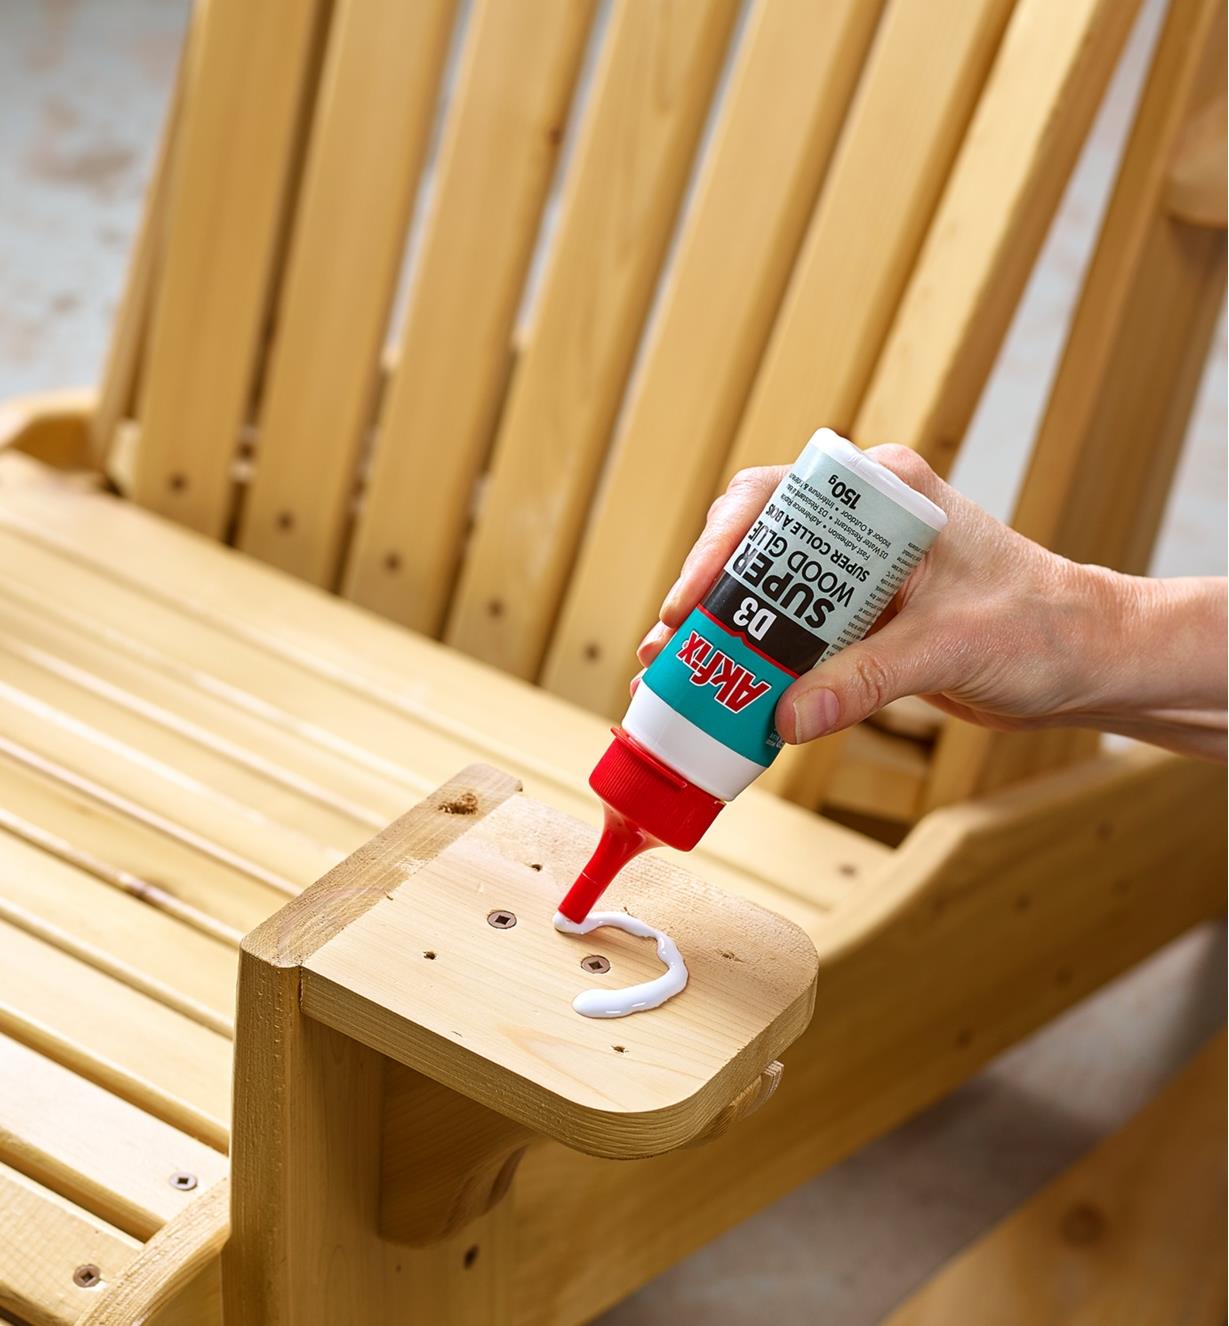 Applying glue to the arm of a wooden chair